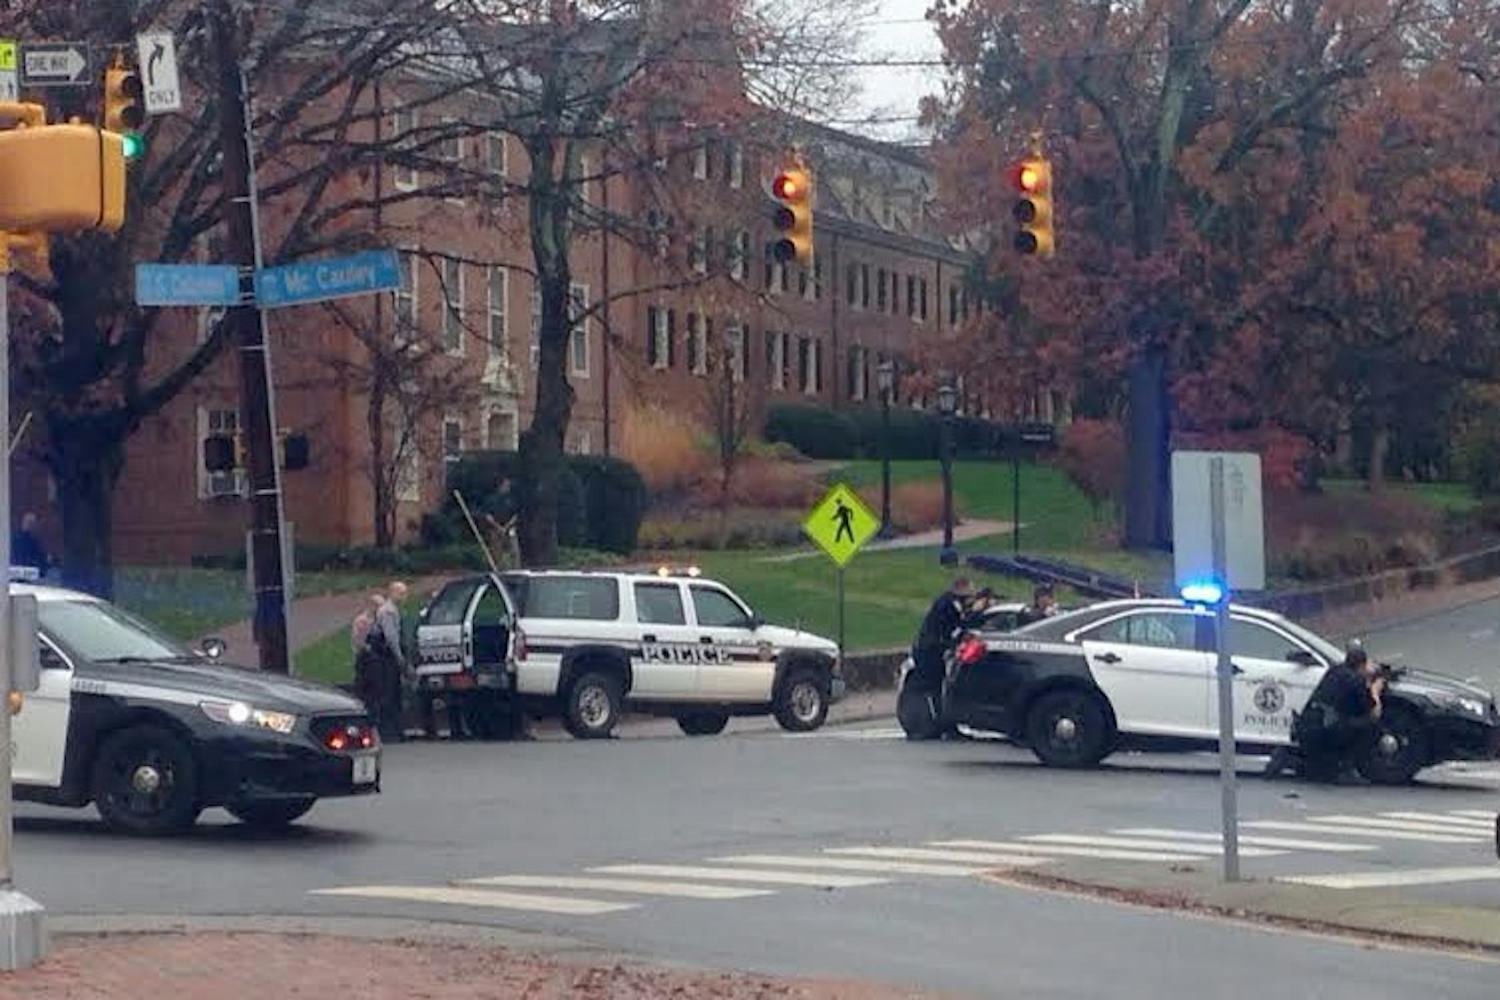 UNC police gather on campus in response to an anonymous 911 phone call at 8:22 on Dec. 2. in 2016